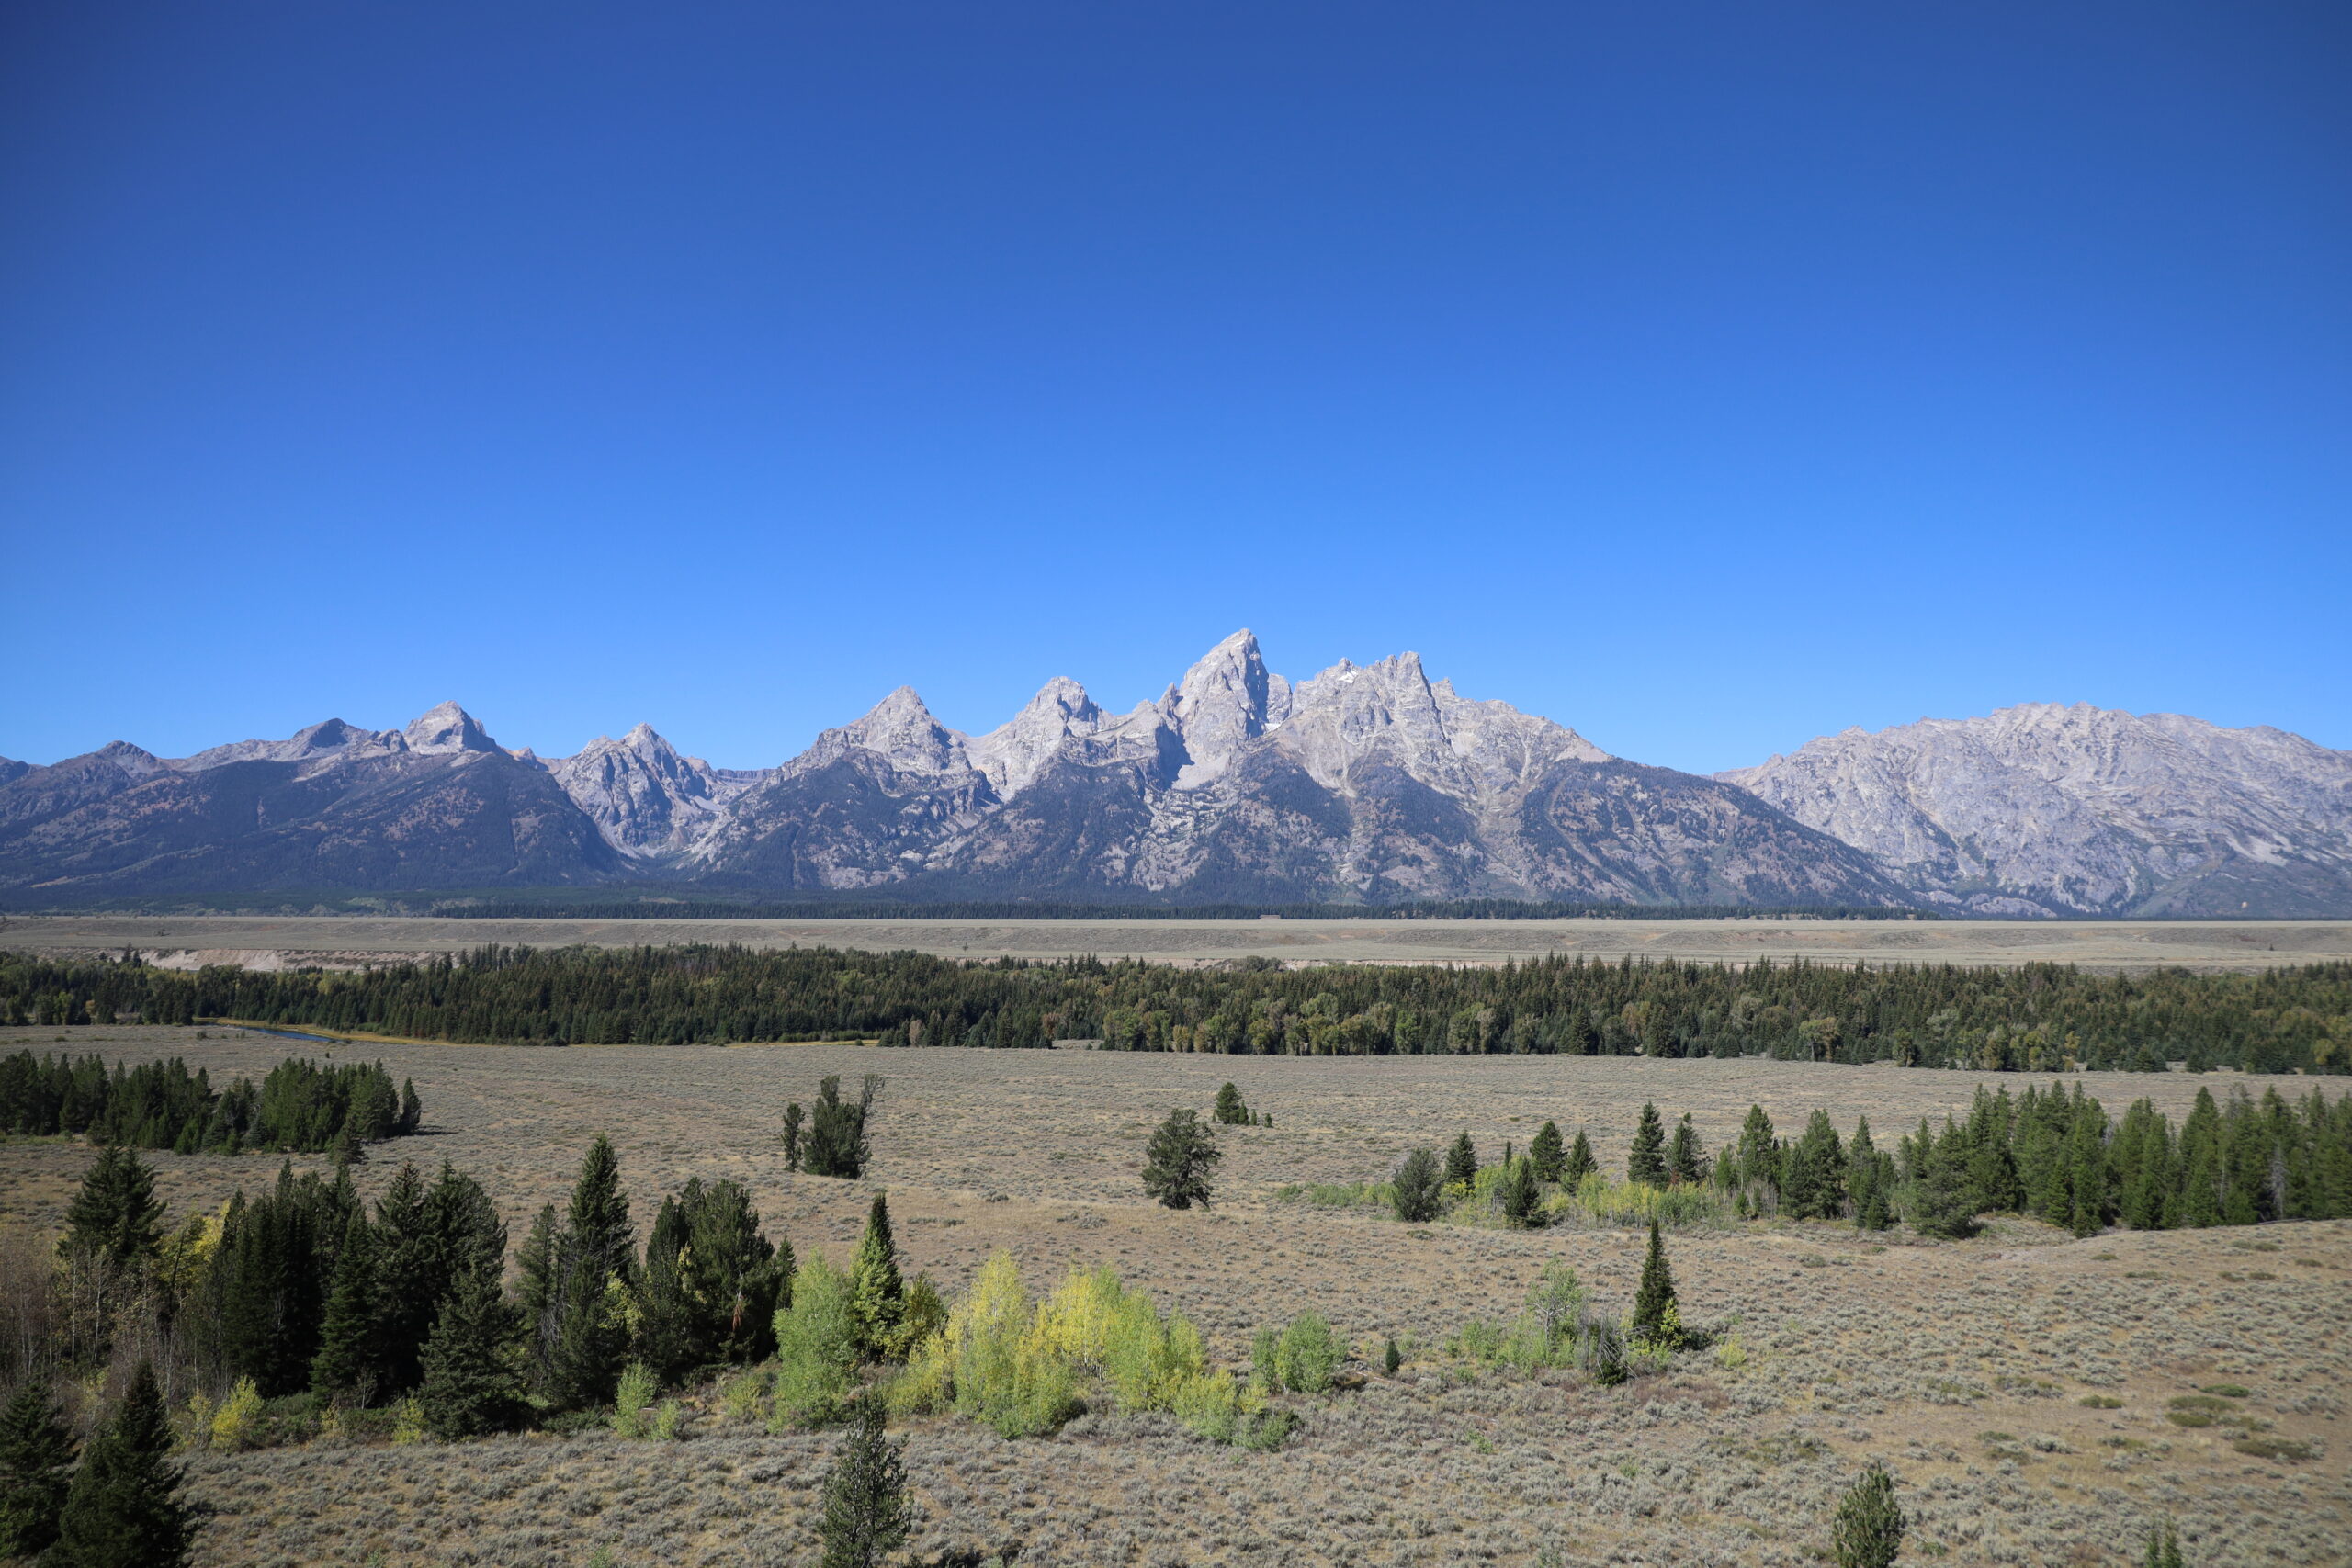 View of Grand Teton National Park from afar